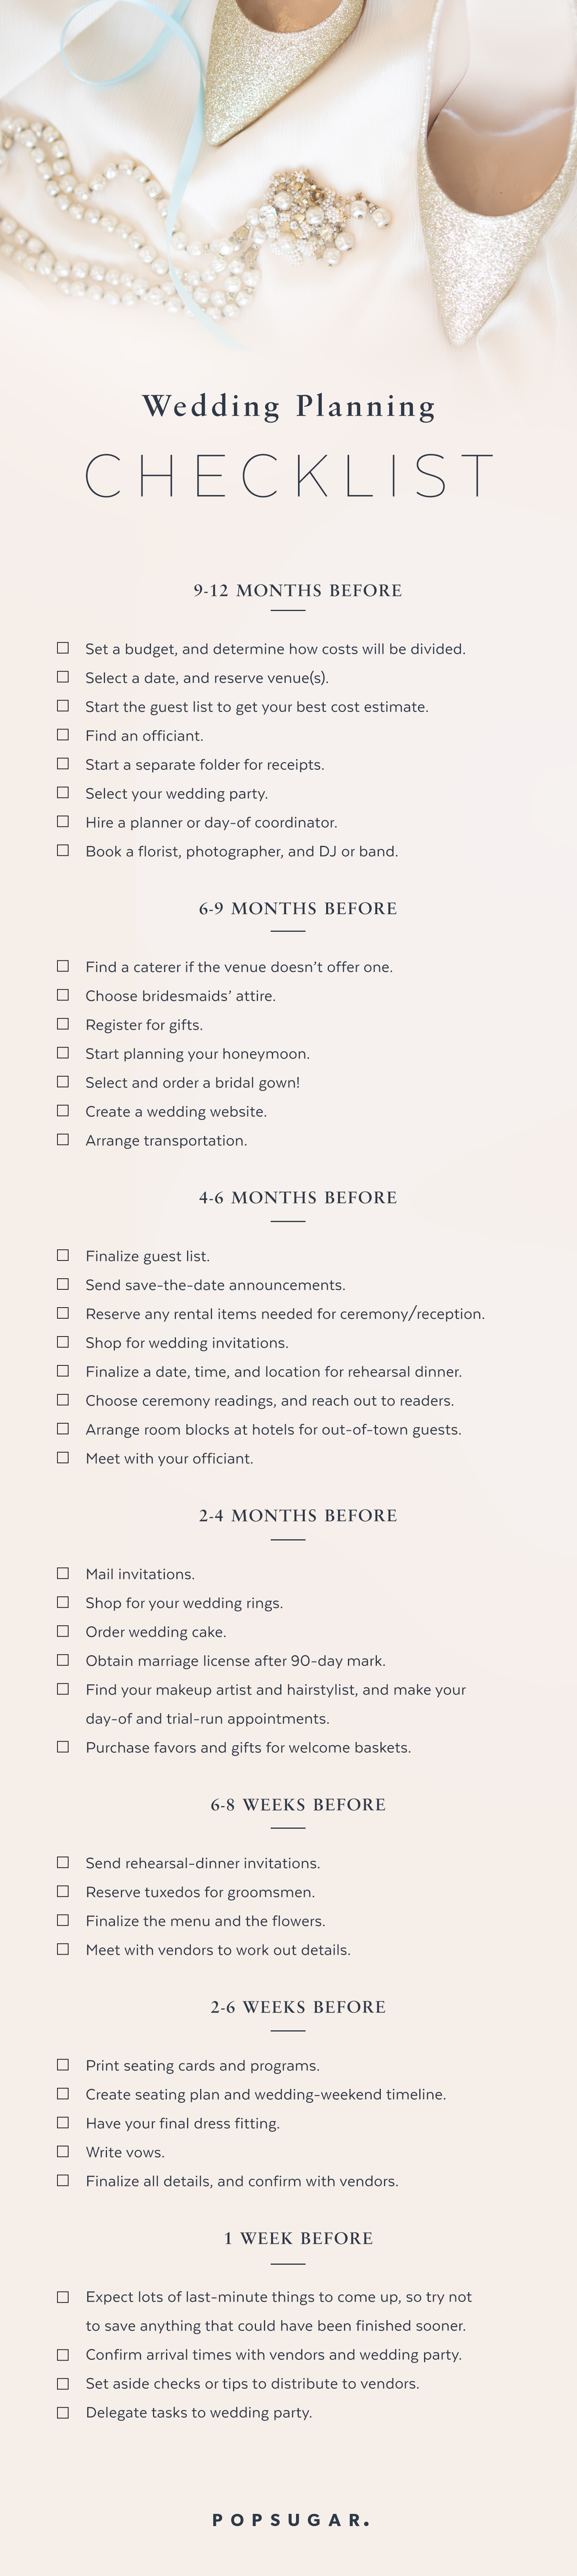 Wedding Registry Ideas: A Must-Have Checklist of Essential Items